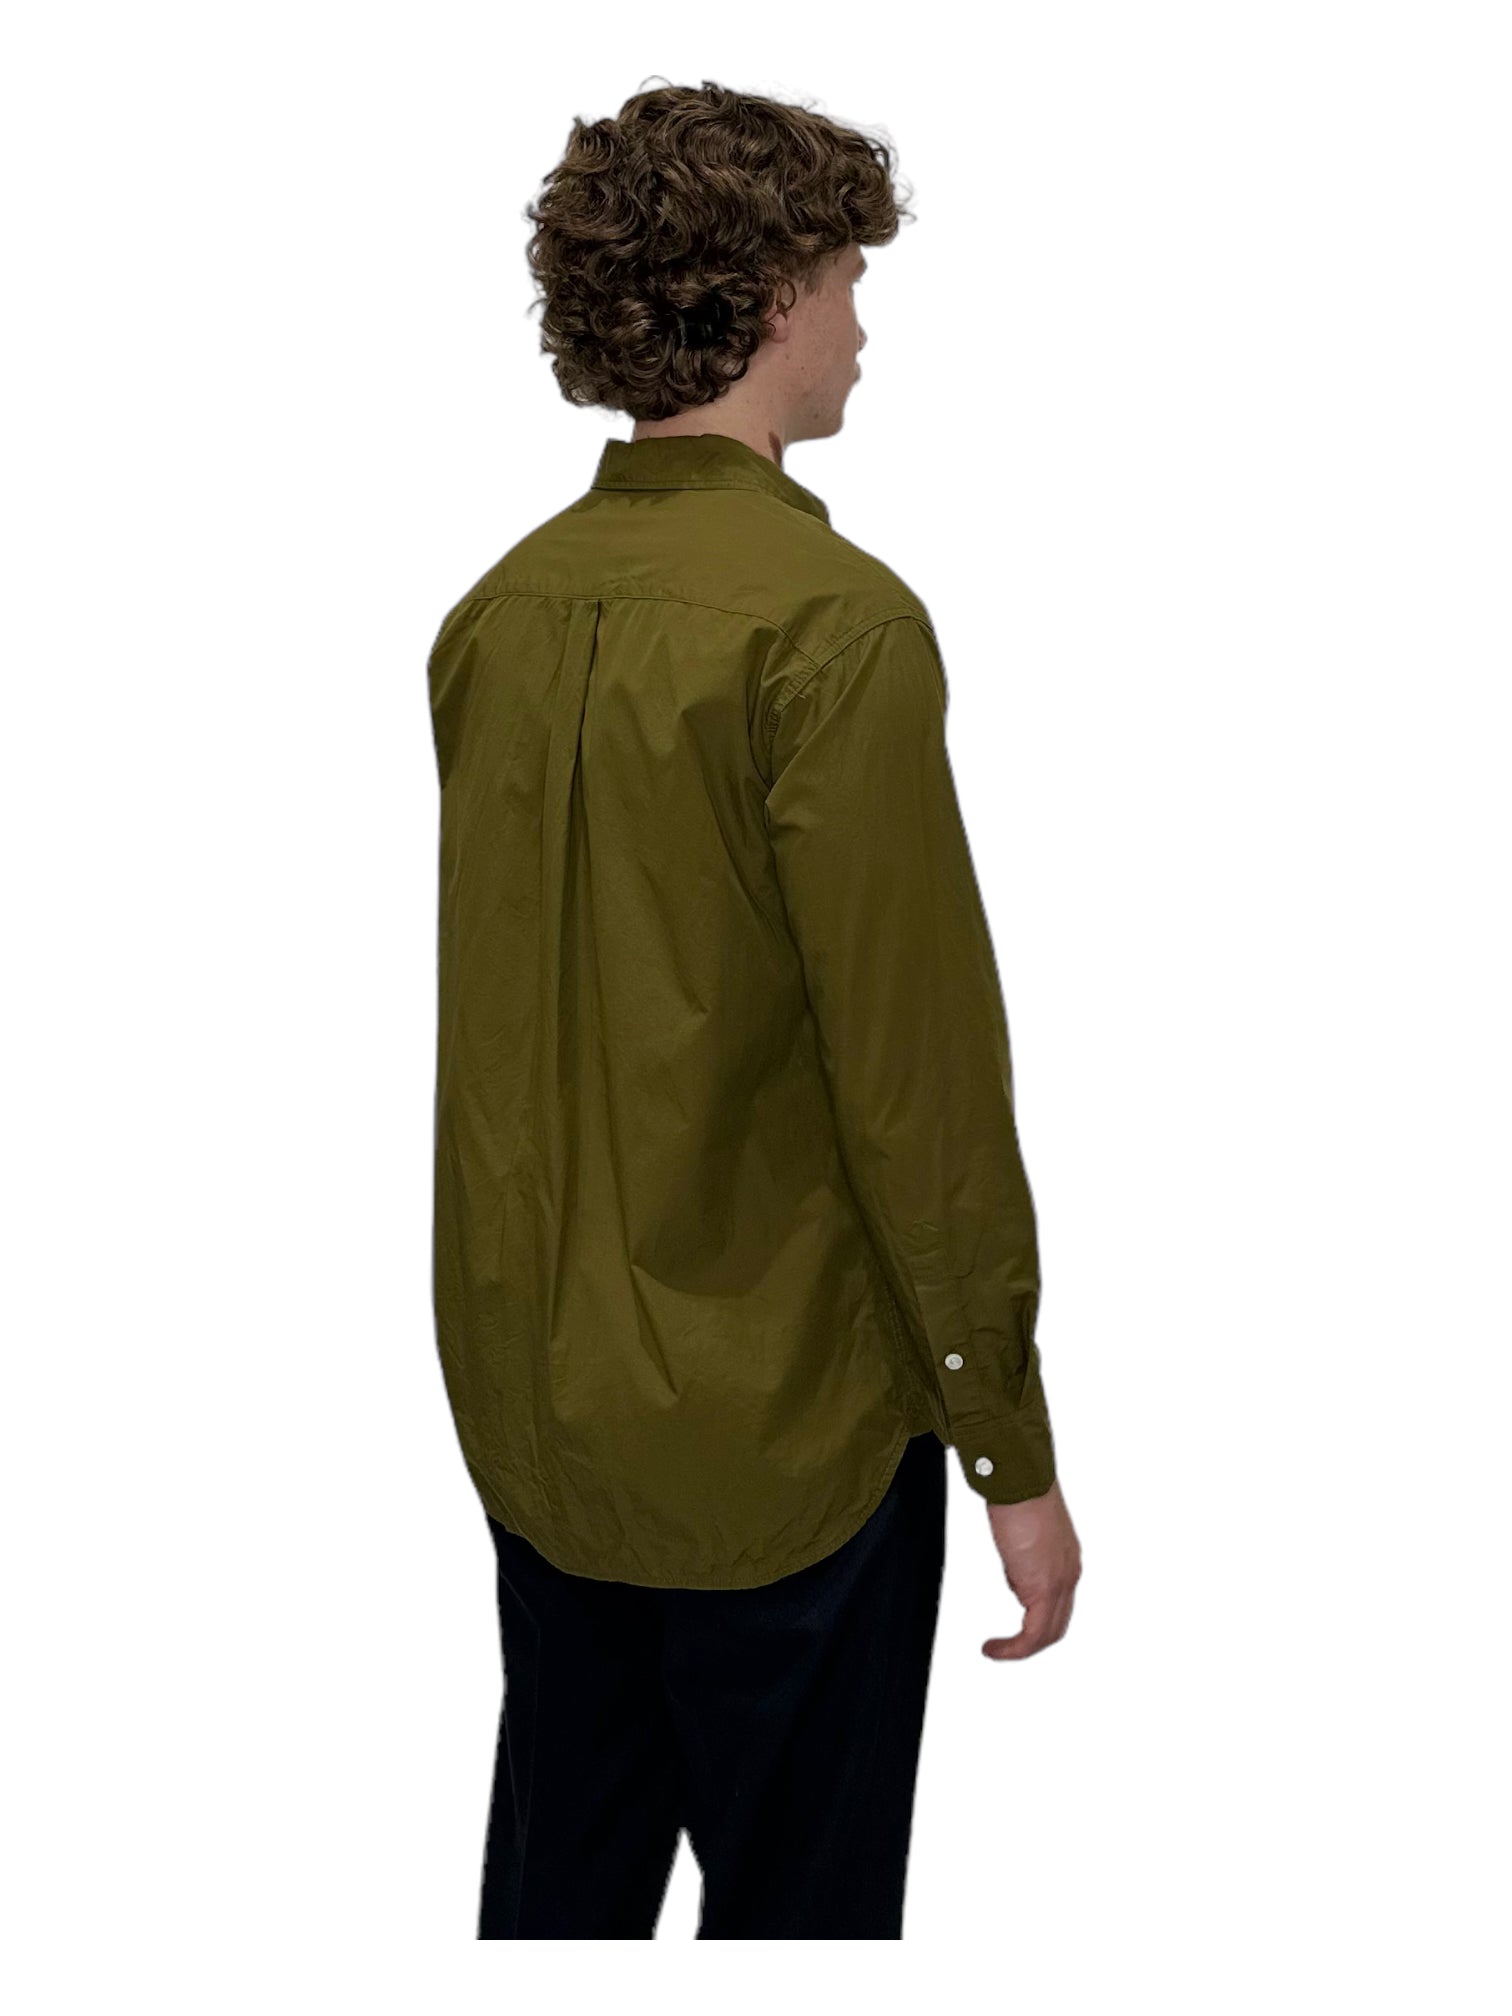 Kestin Hare Olive Liverpool Work Shirt - Genuine Design Luxury Consignment for Men. New & Pre-Owned Clothing, Shoes, & Accessories. Calgary, Canada